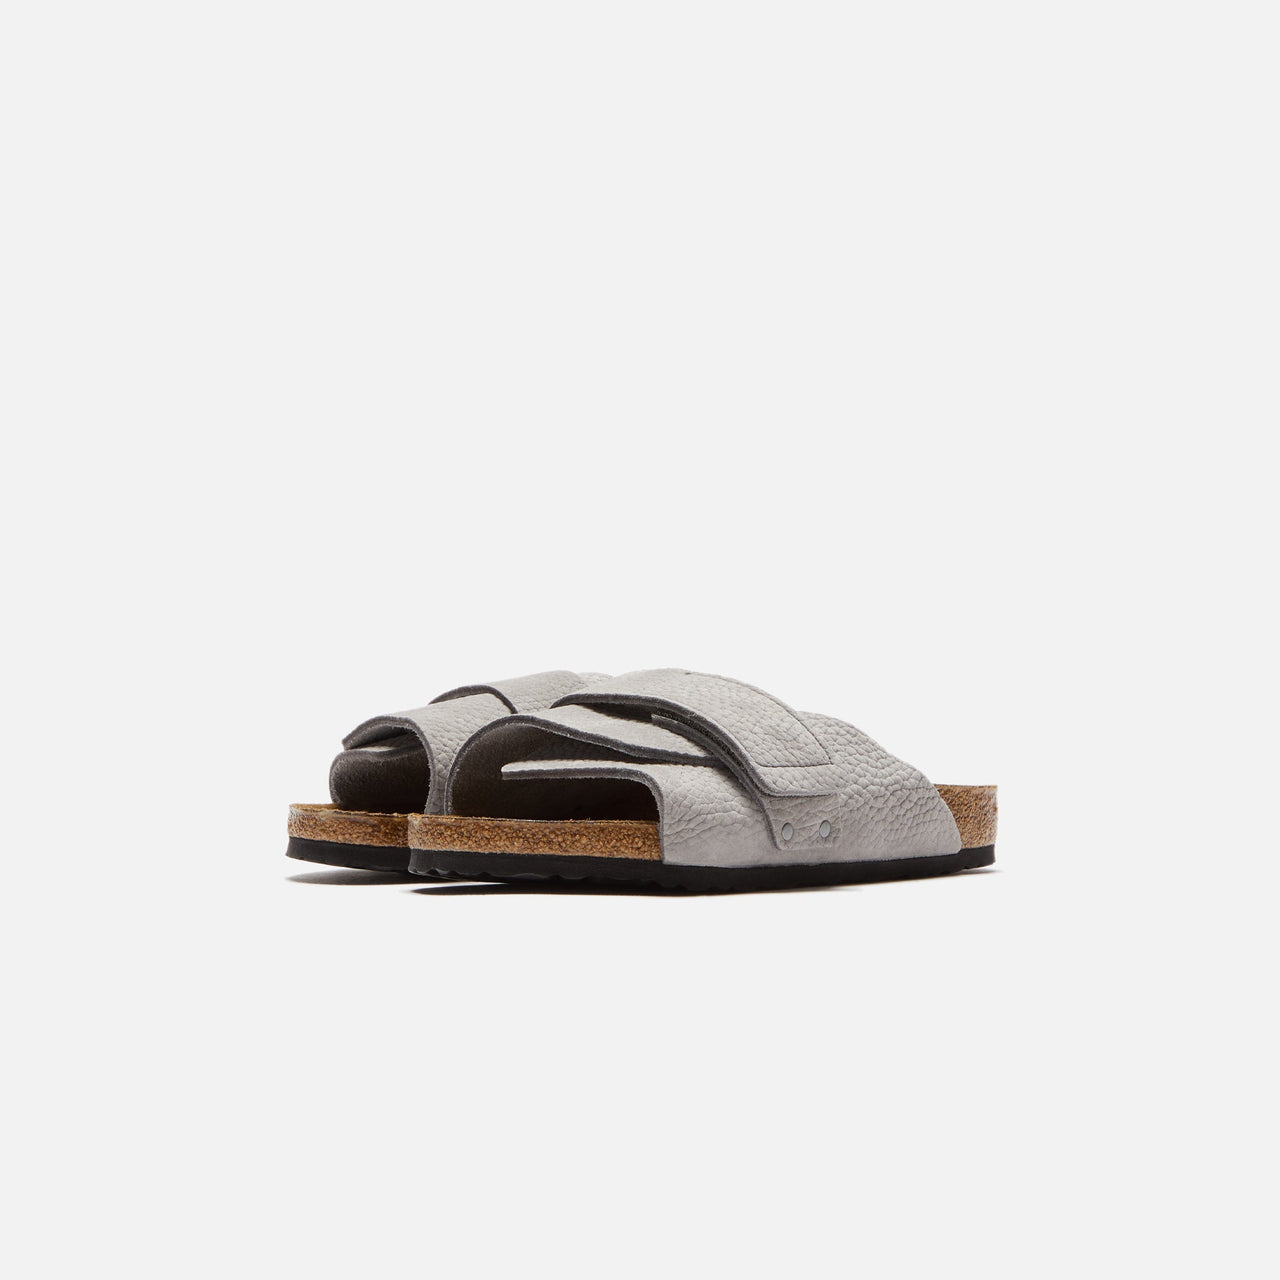 Close-up of the Birkenstock Kyoto Nubuck Whale Grey sandal showing the comfortable footbed